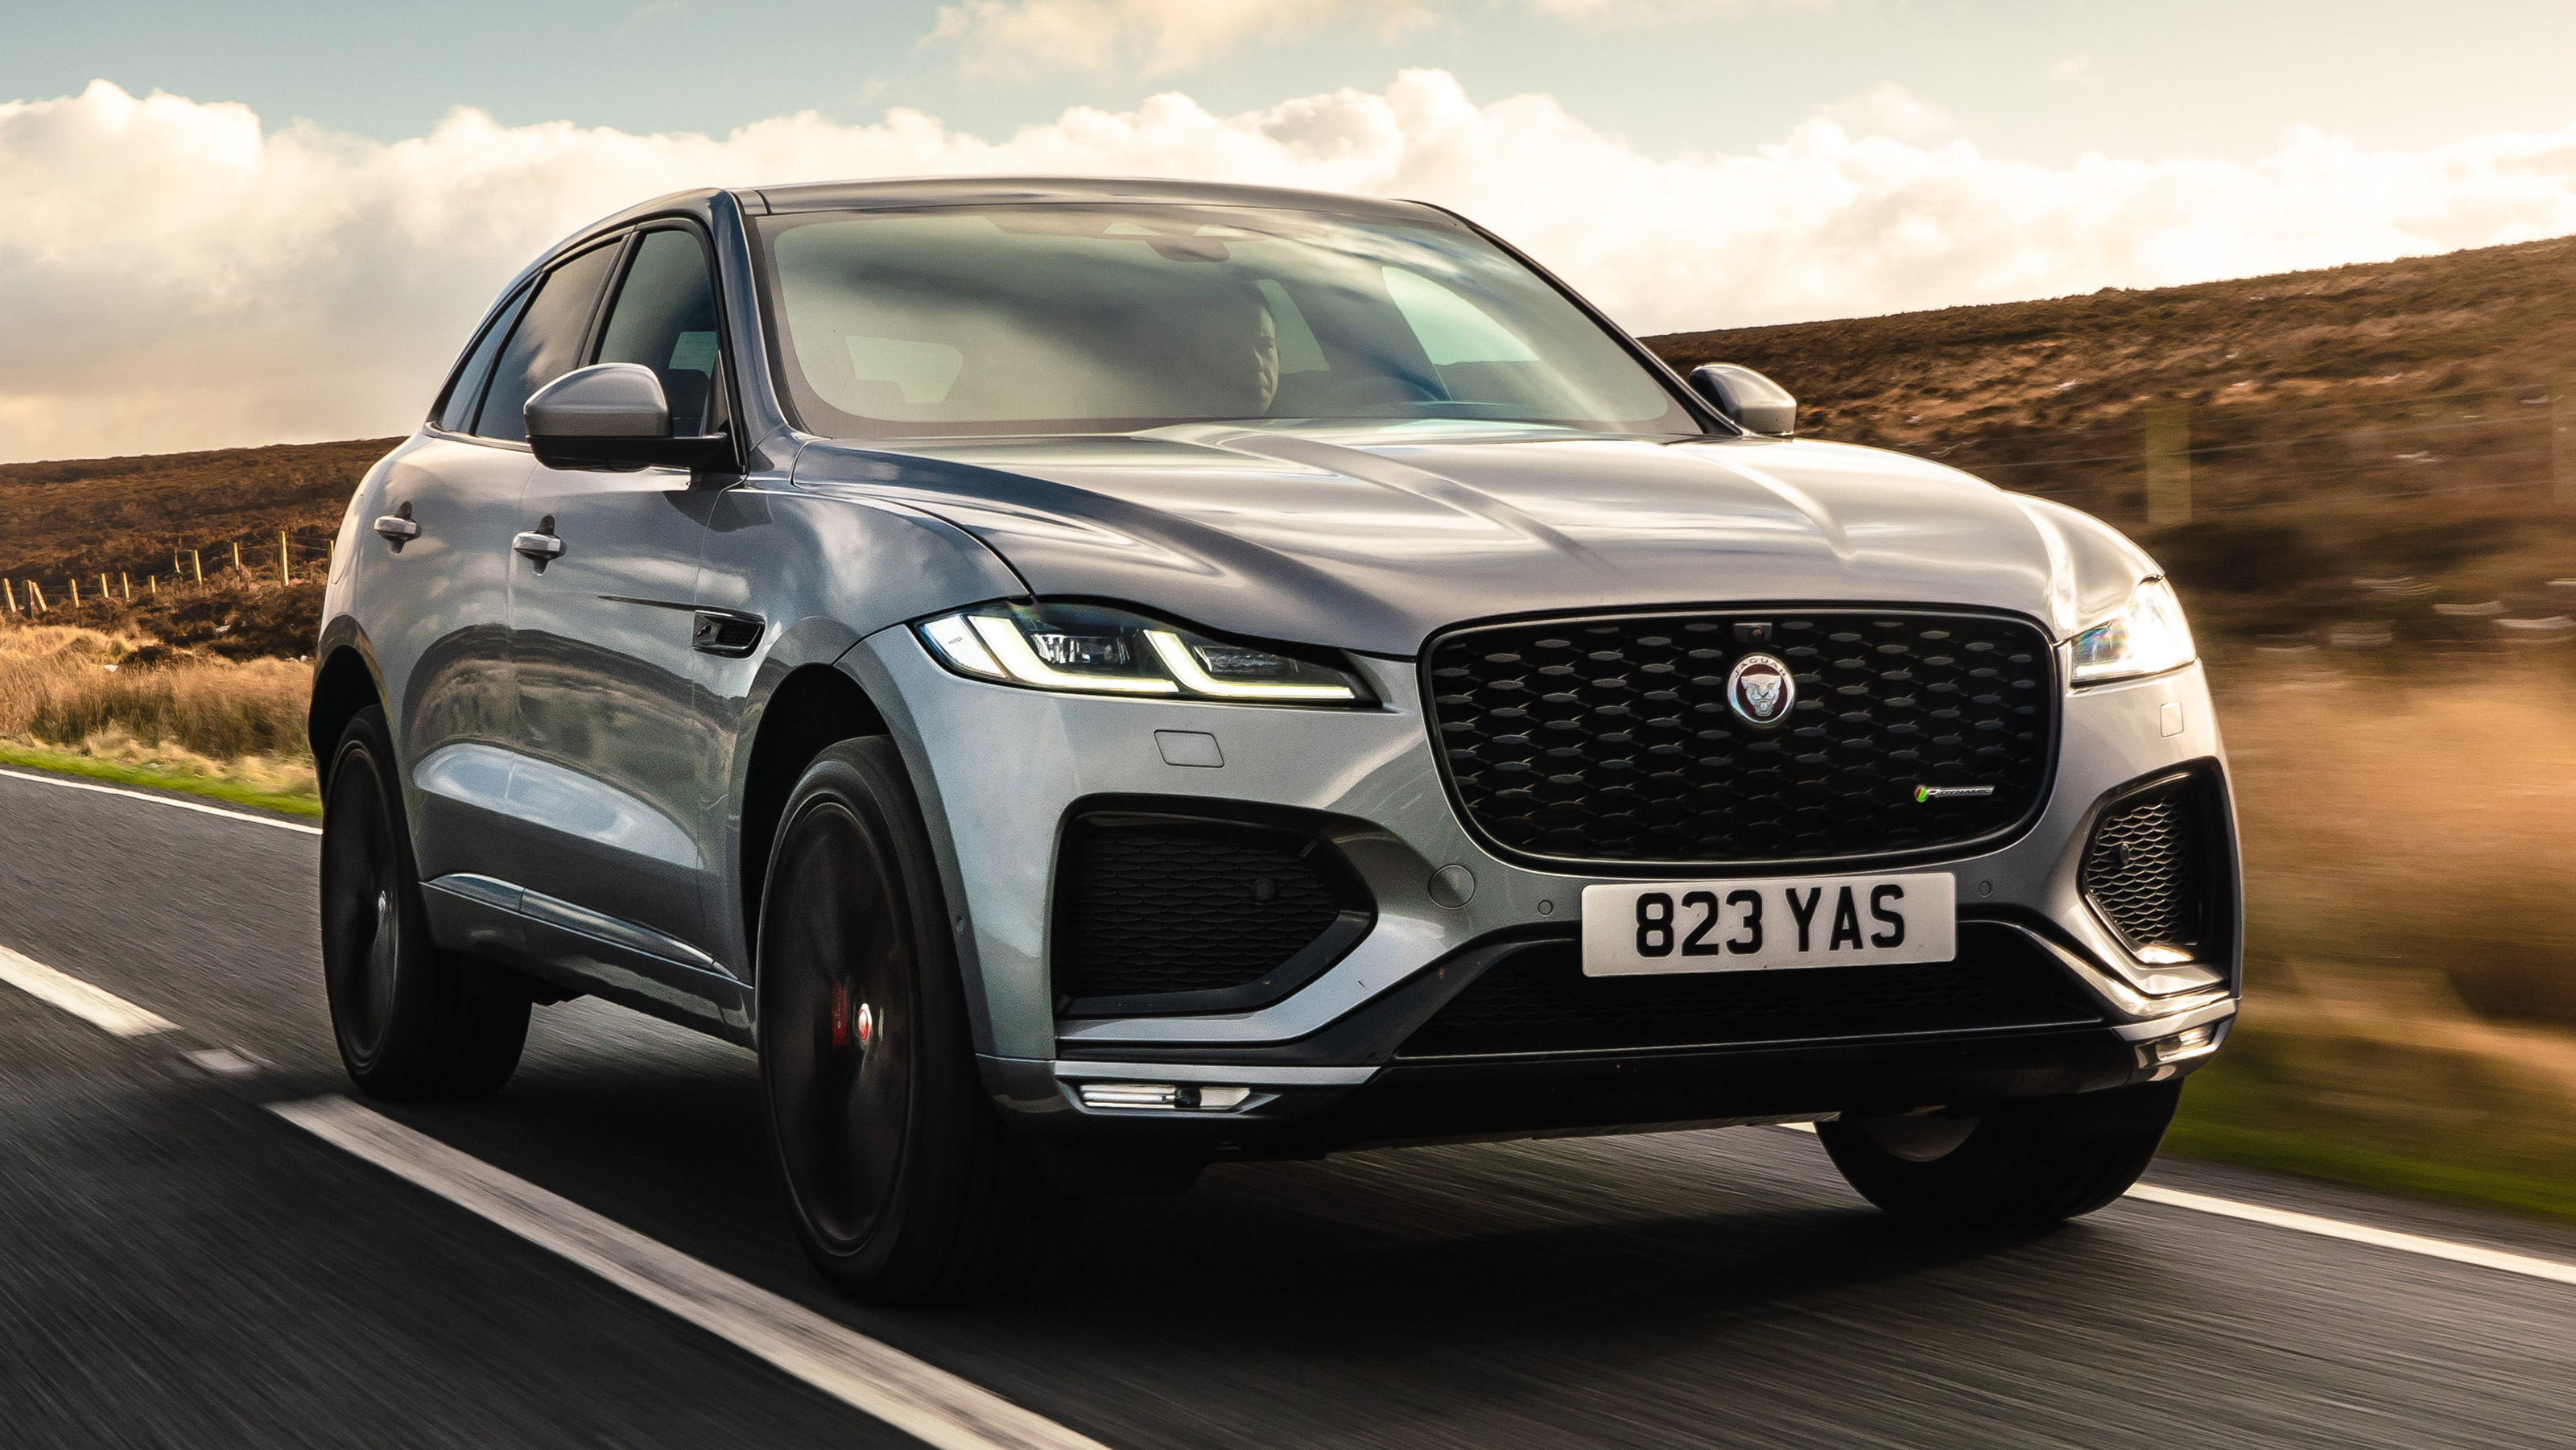 Jaguar FPace SUV Engines, drive & performance Carbuyer